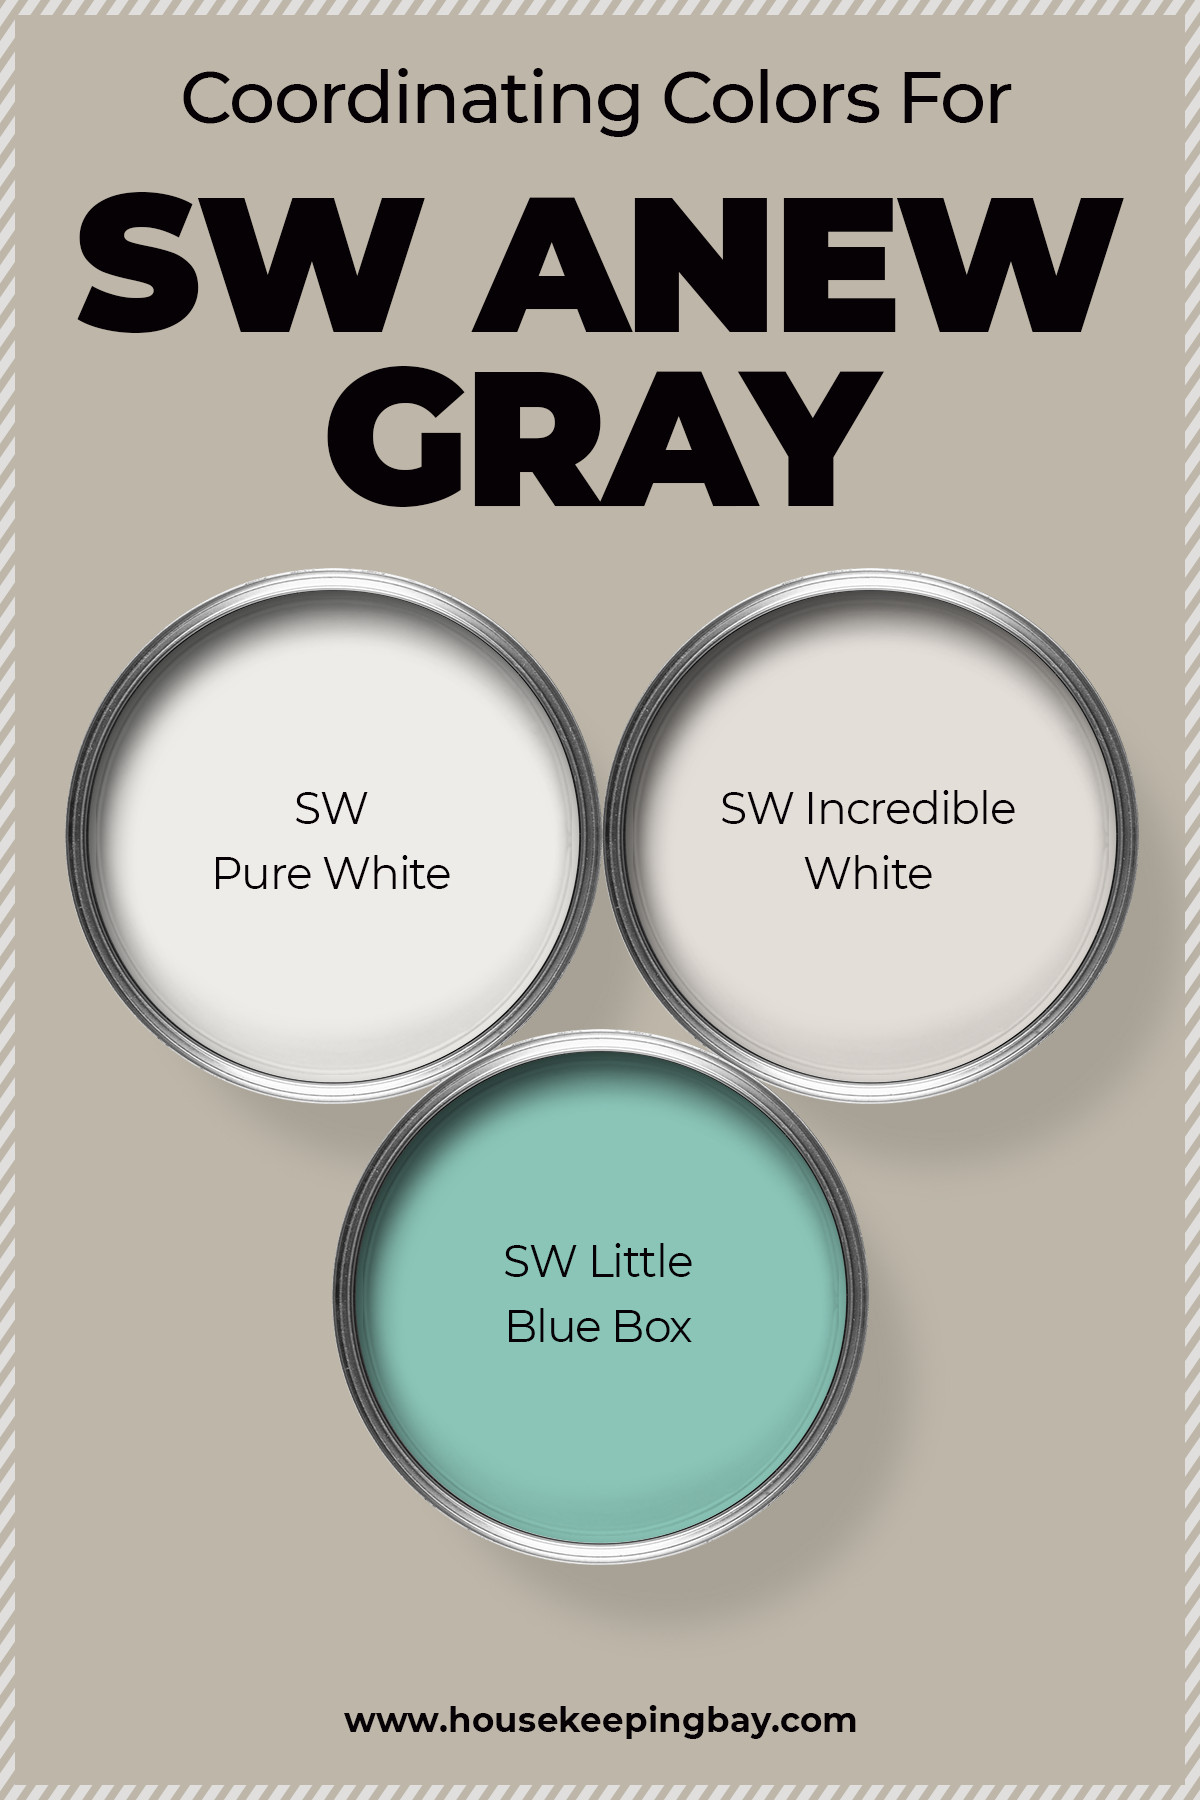 Coordinating Colors For SW Anew Gray